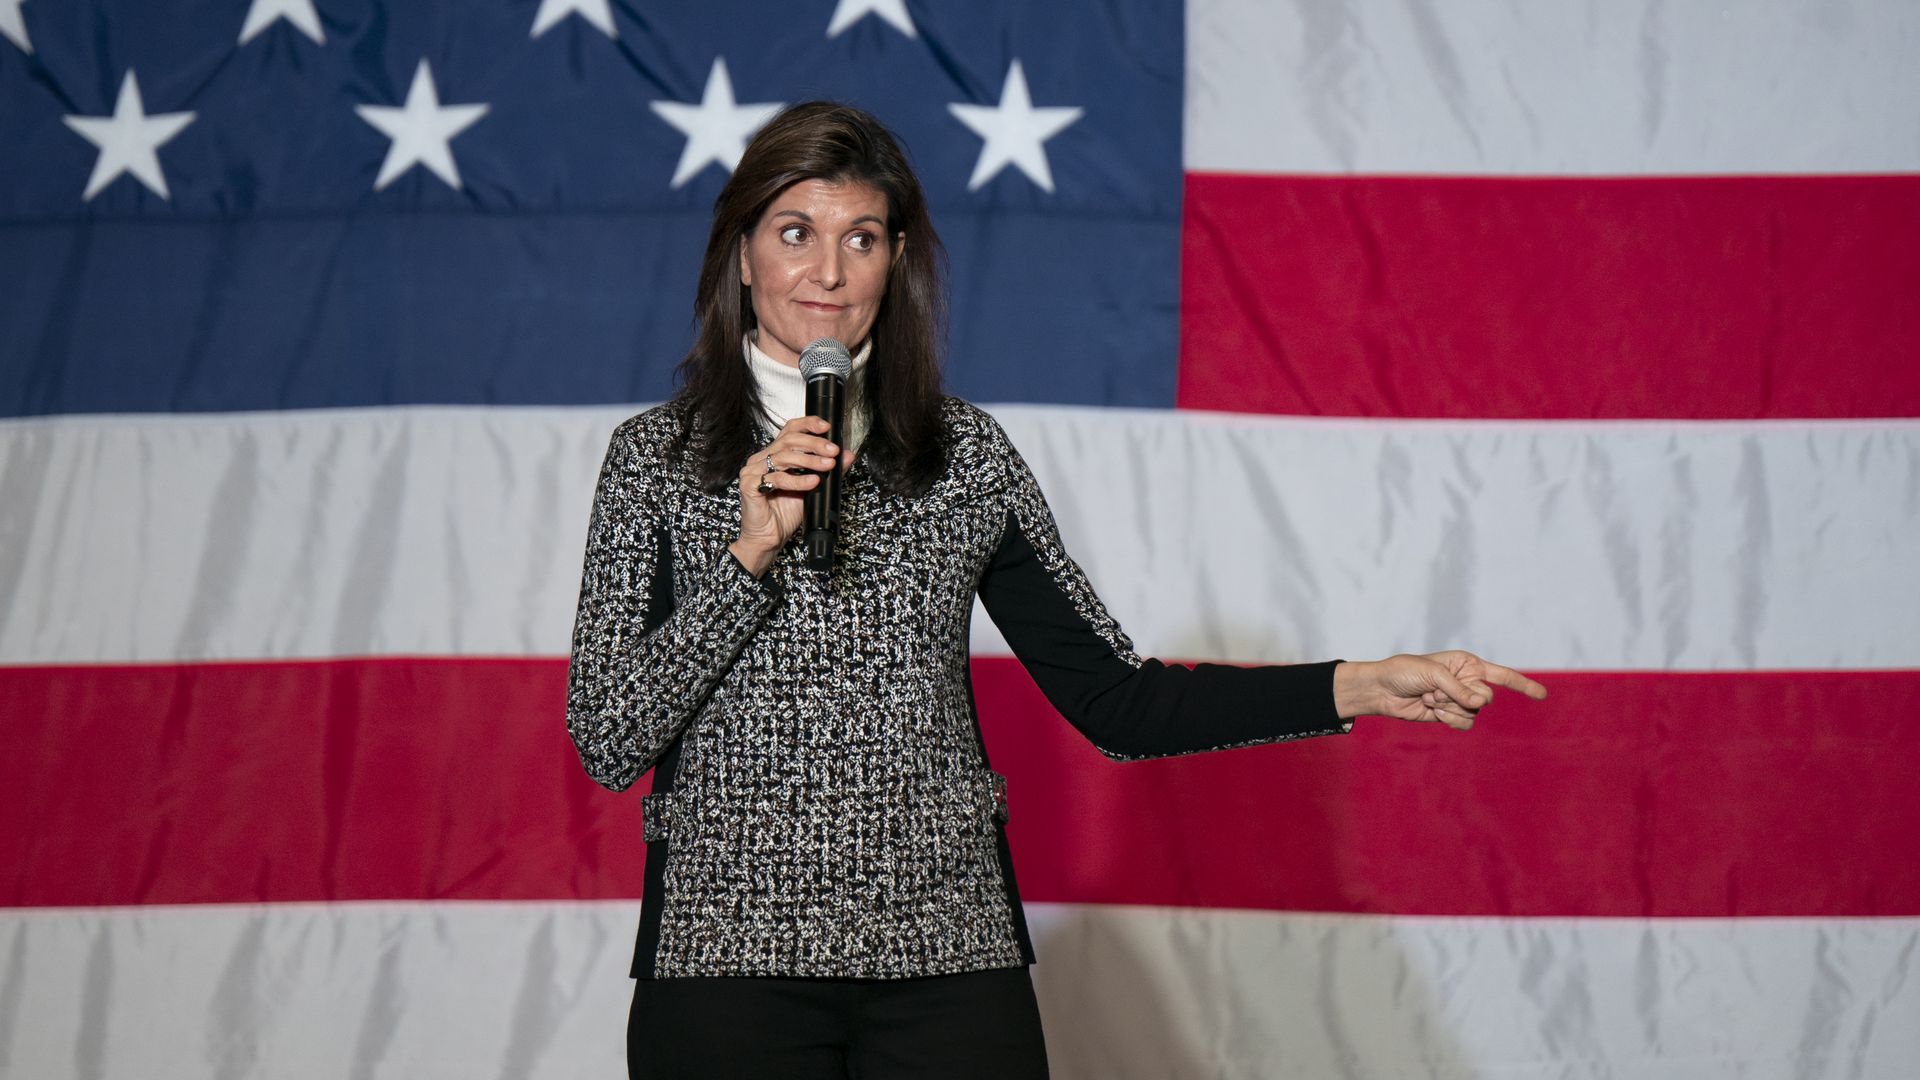 A woman holds a microphone while standing in front of a large American flag backdrop.